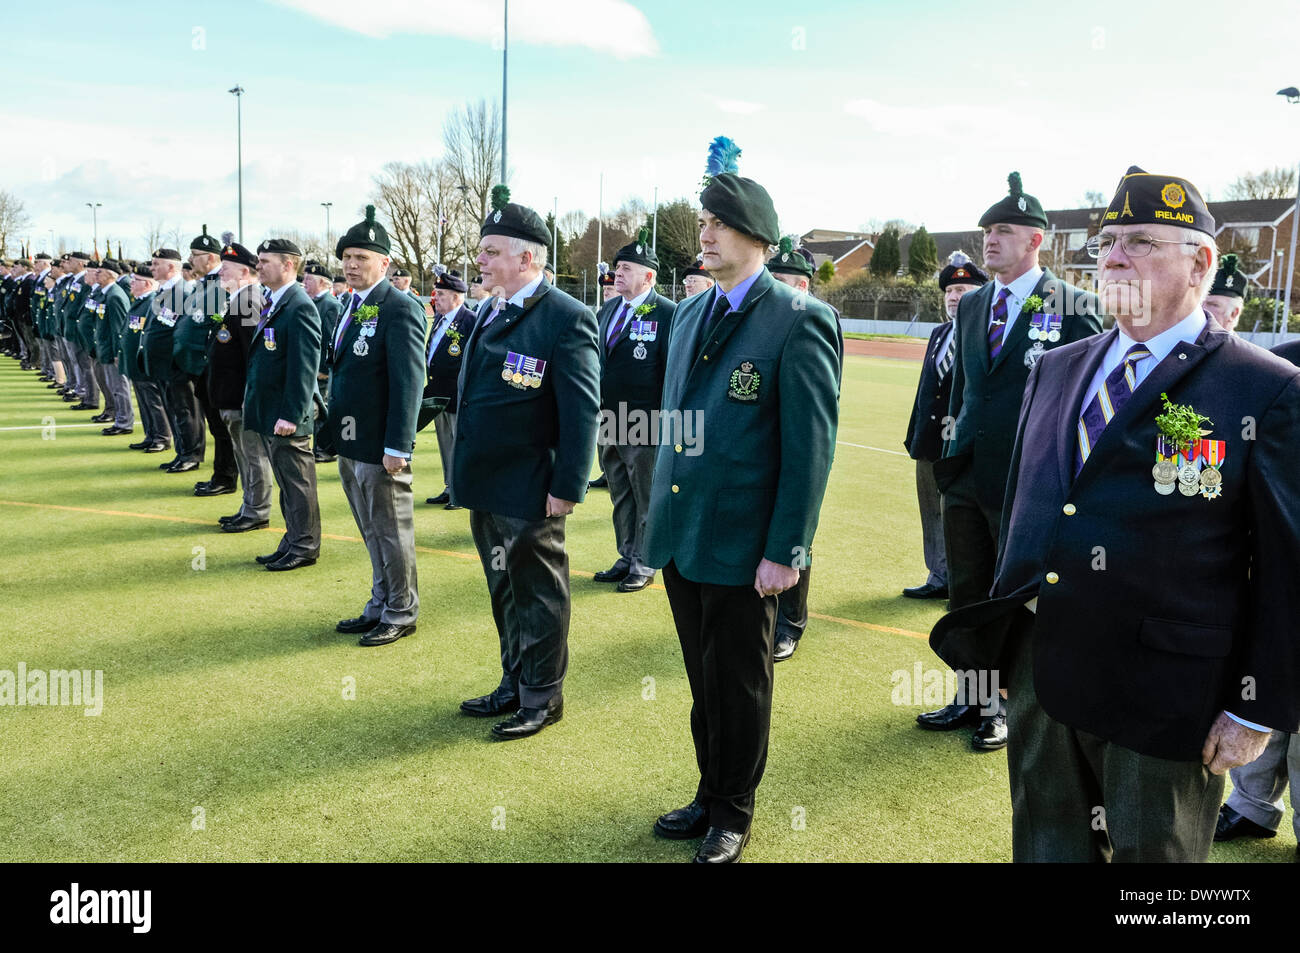 Lisburn, Northern Ireland. 15 Mar 2014 - Old Comrades from the 2nd Batallion Royal Irish Regiment on parade at the Shamrock Presentation and Drumhead Service in Thiepval Barracks. Credit:  Stephen Barnes/Alamy Live News Stock Photo